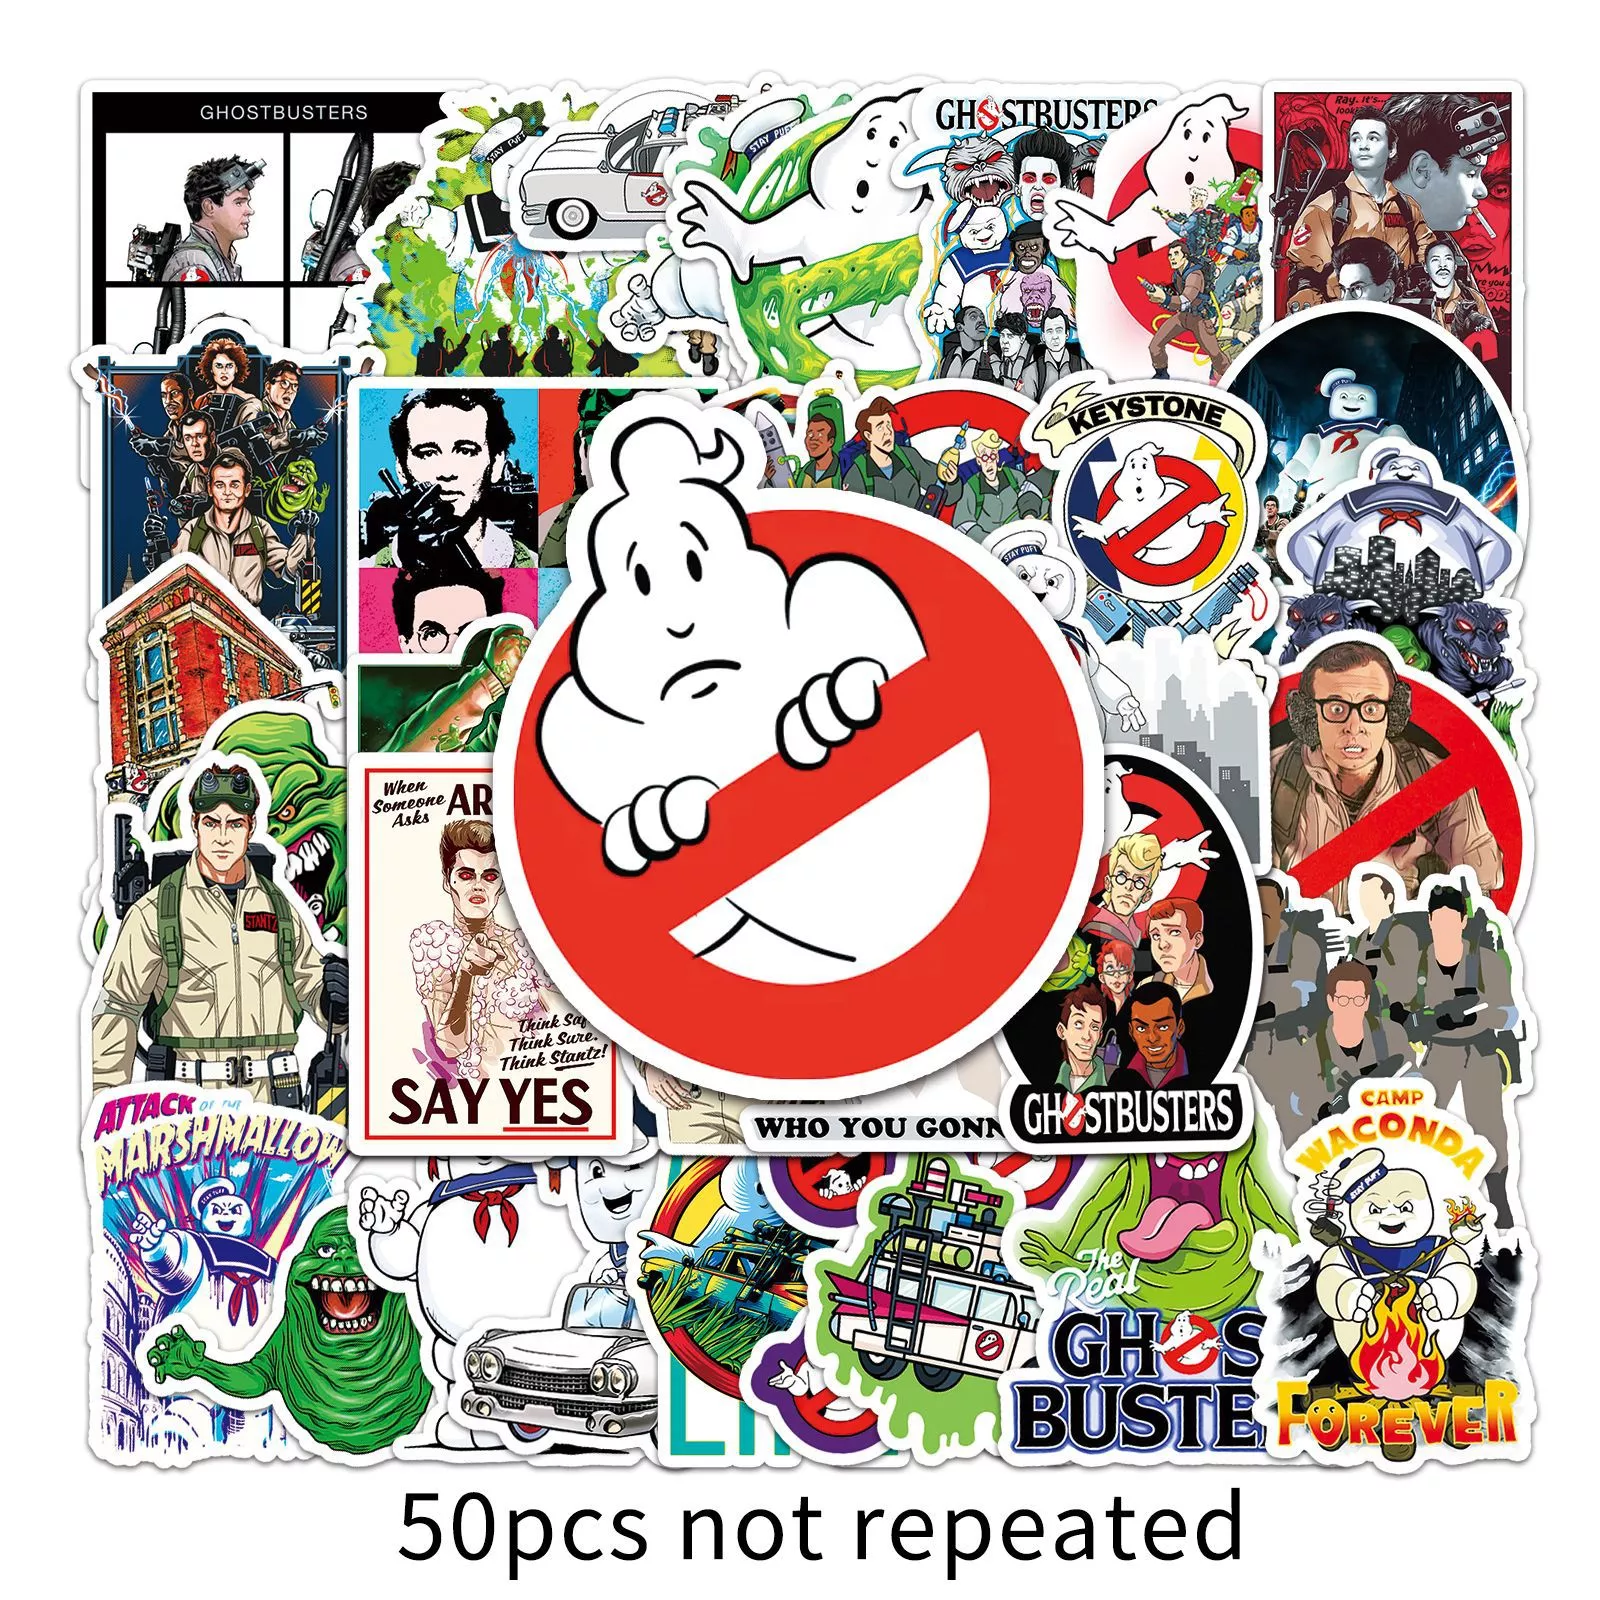 10/30/50pcs  Ghostbuster U.s. Drama Stickers Scooter Luggage Compartment Scrapbook Notebook Computer Diycar Motorcycle Stickers 10 30 50pcs seven color rainbow bridge small fresh graffiti stickers luggage mobile phone helmet computer stickers wholesale